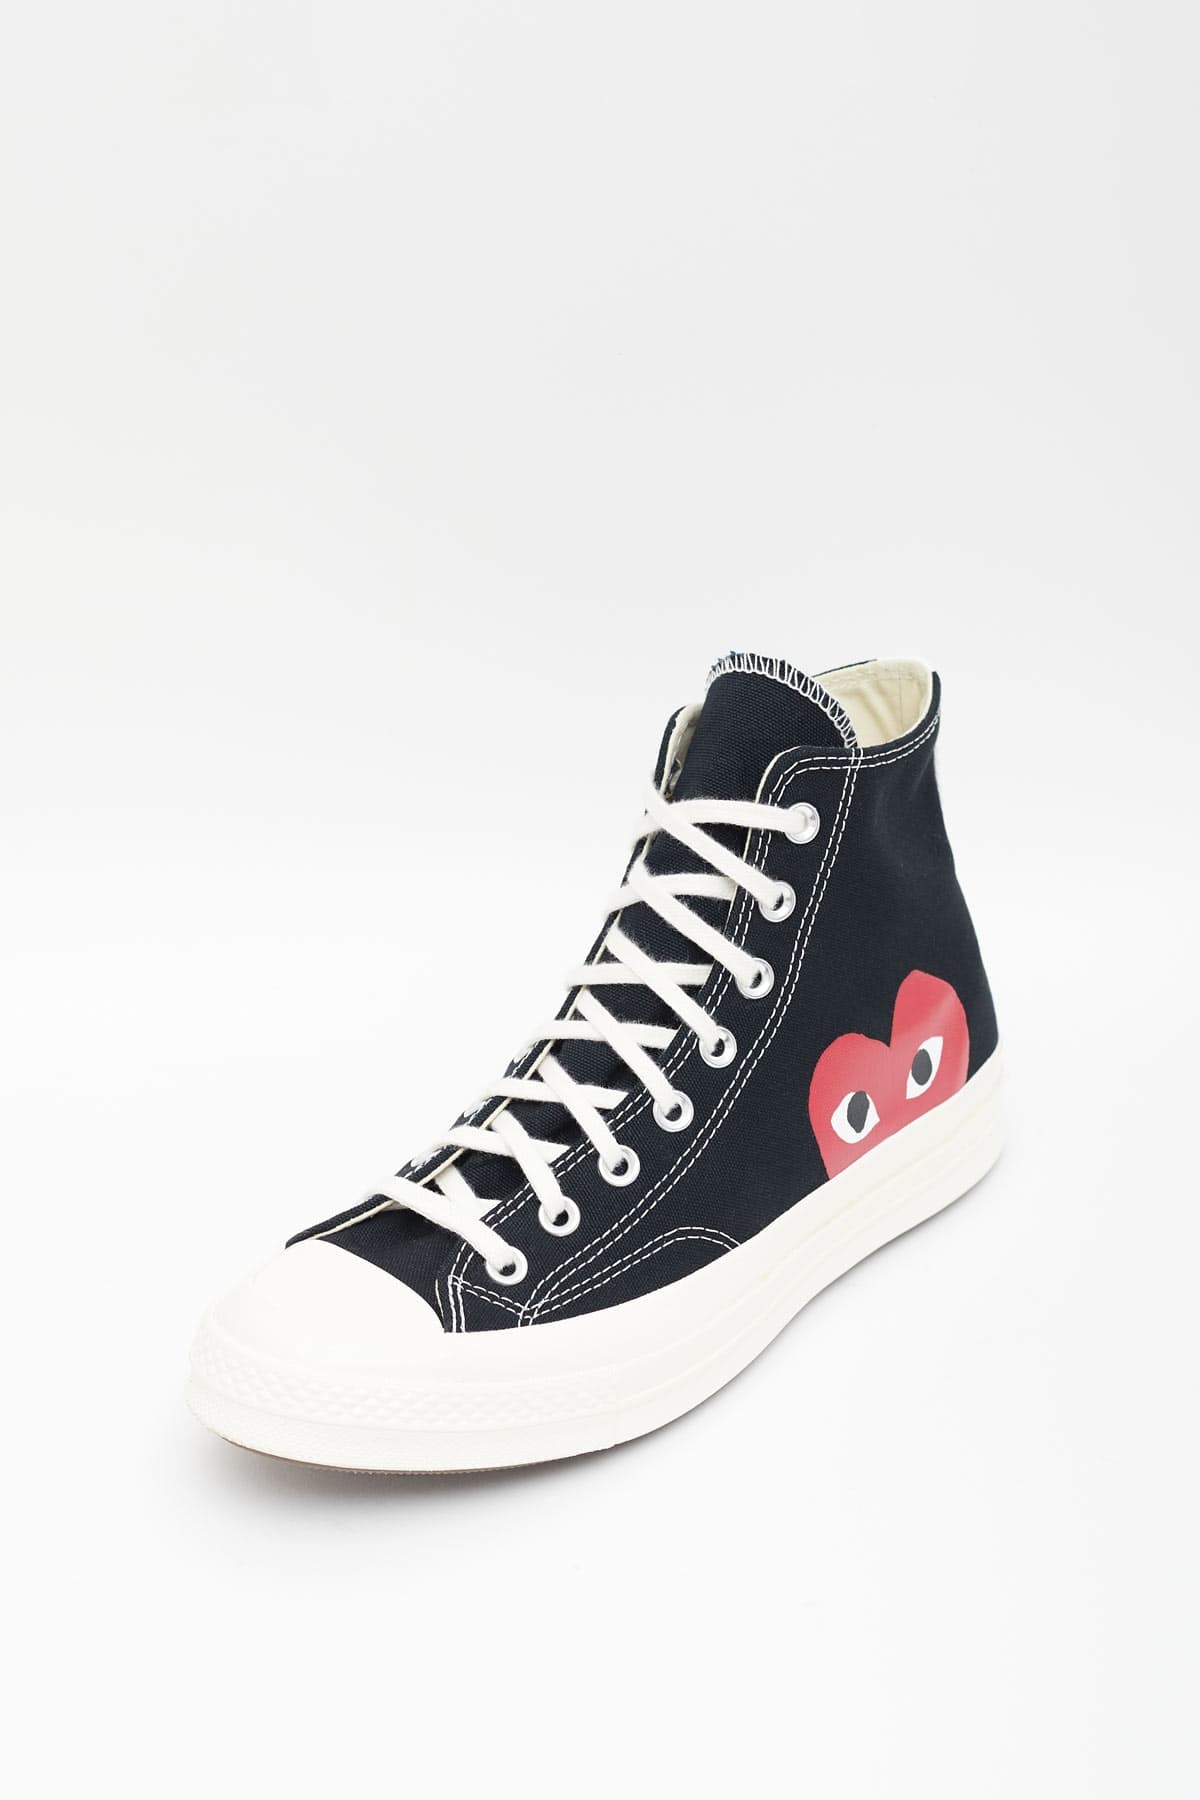 COMME DES GARCONS PLAY CONVERSE CHUCK TAYLOR 70 HIGH SNEAKERS IAMNUE